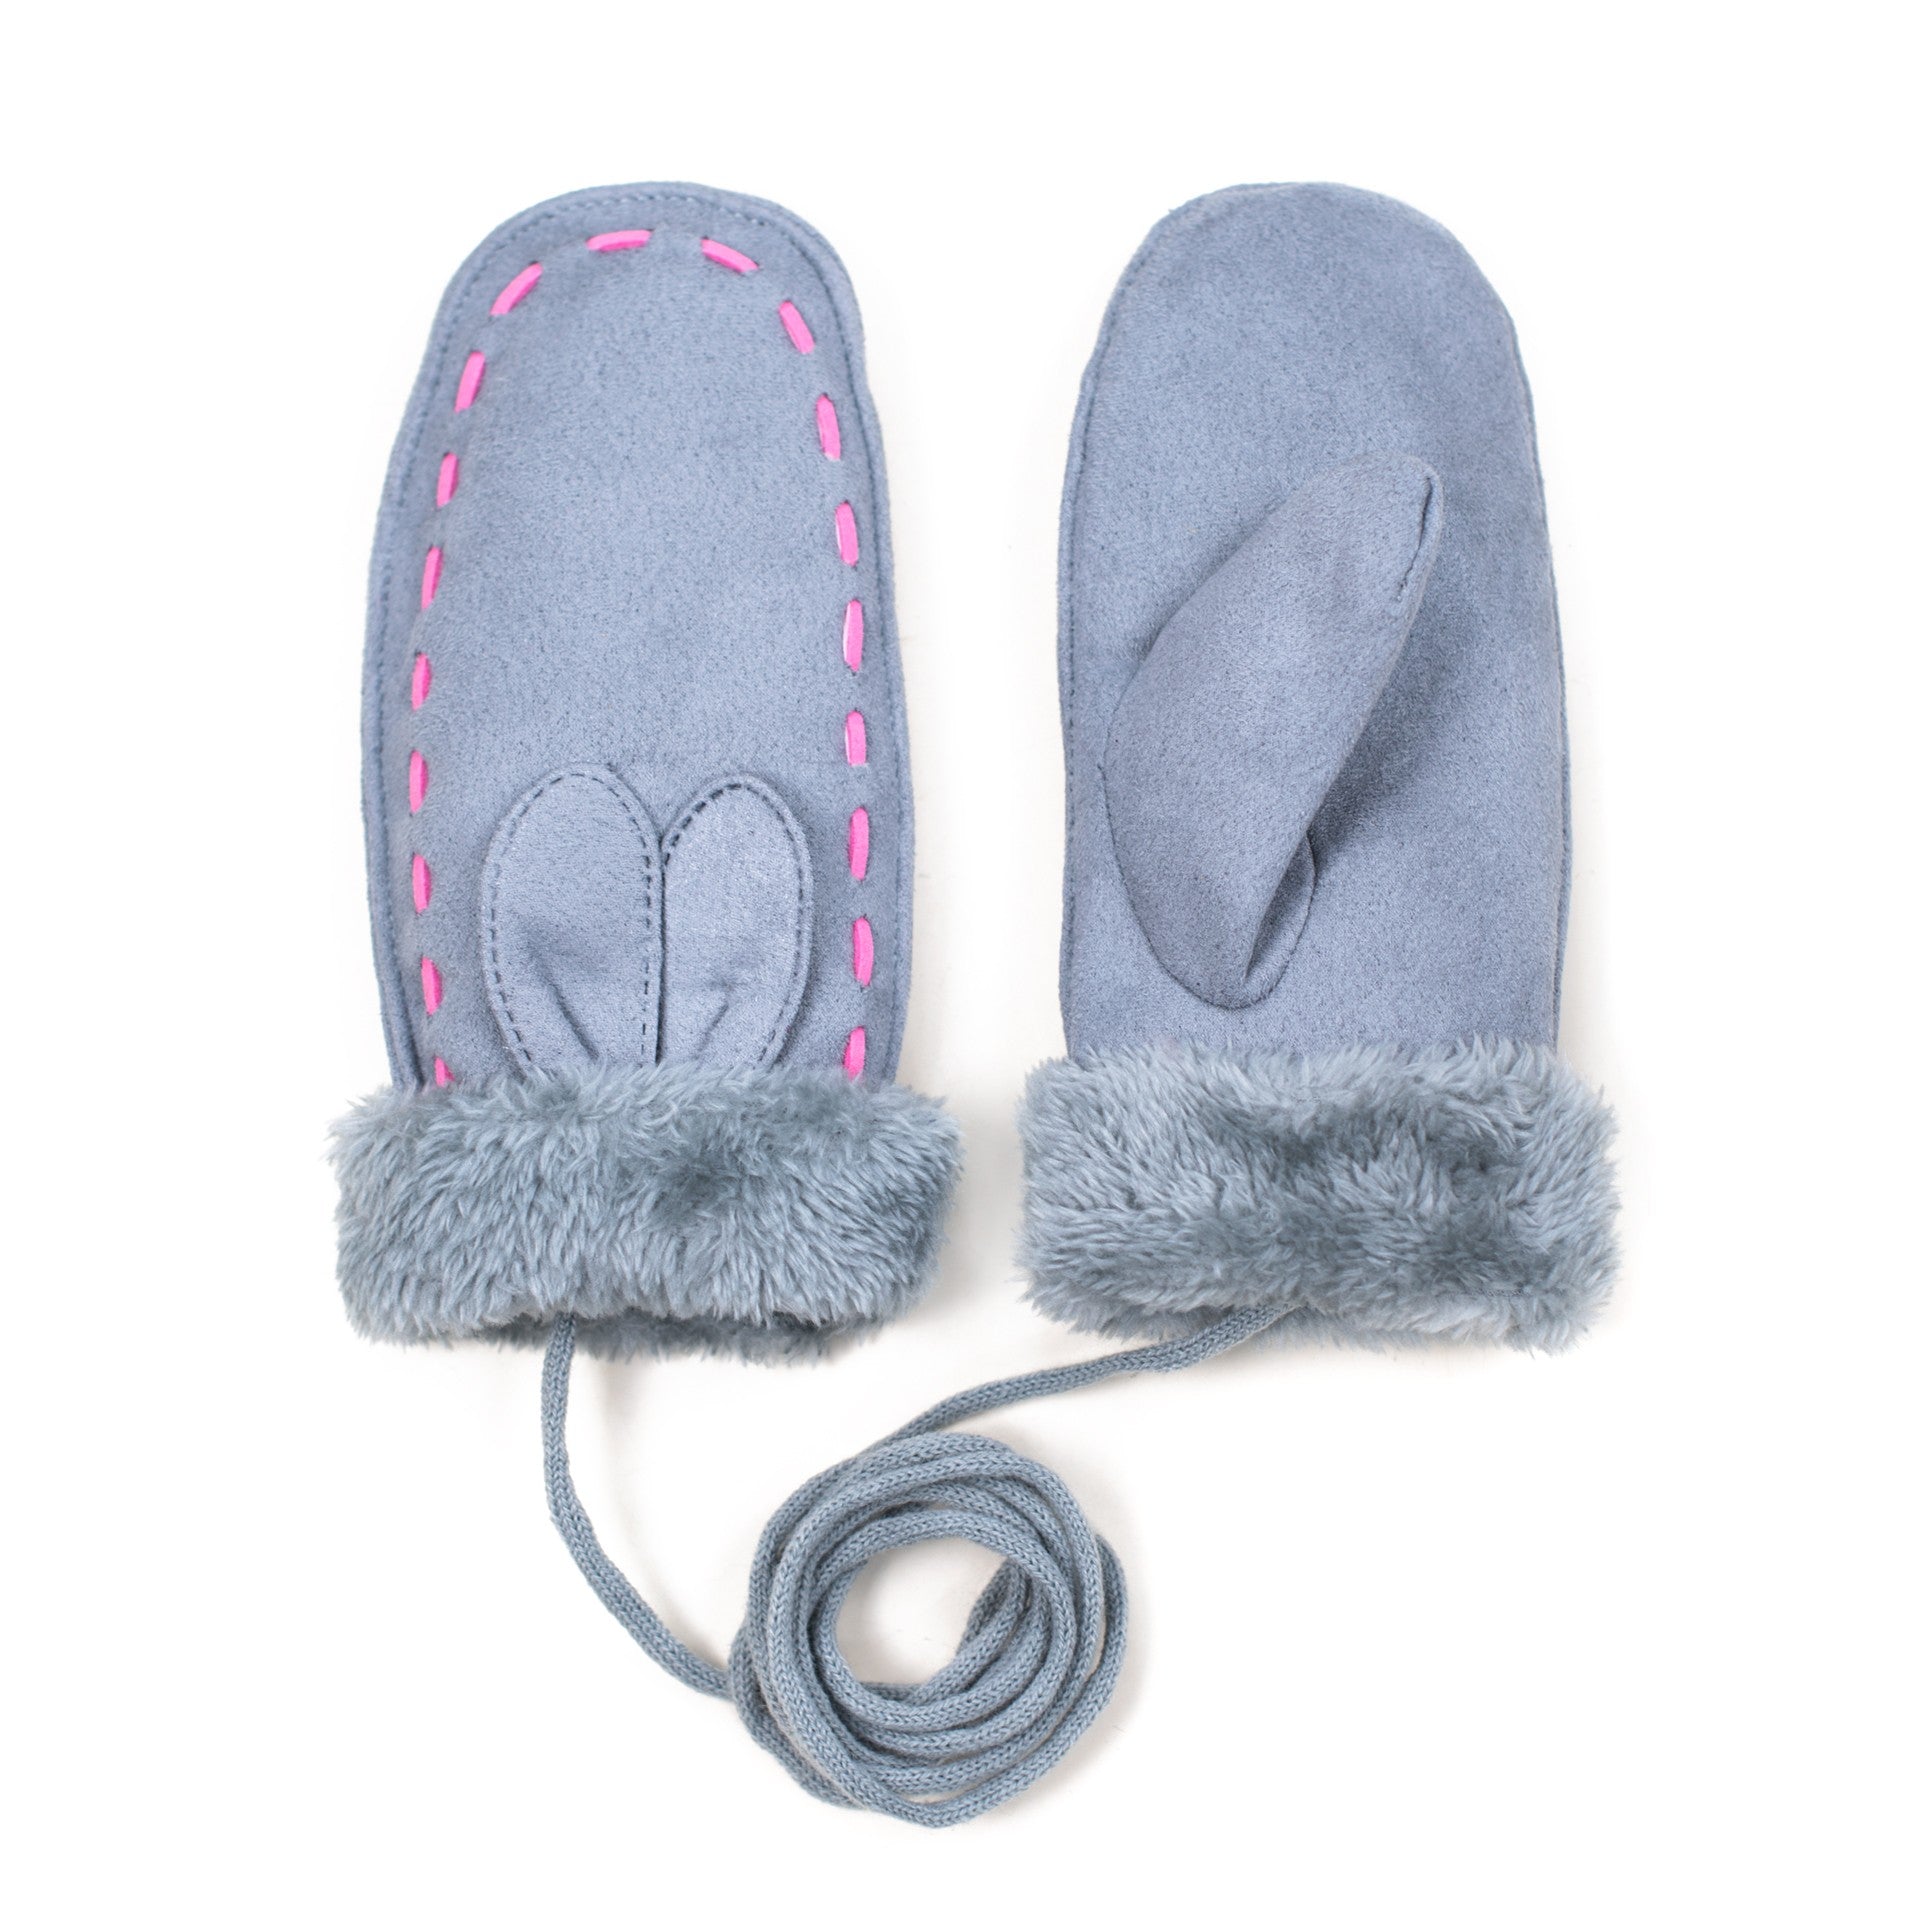 Grey Bunny Mittens for Kids